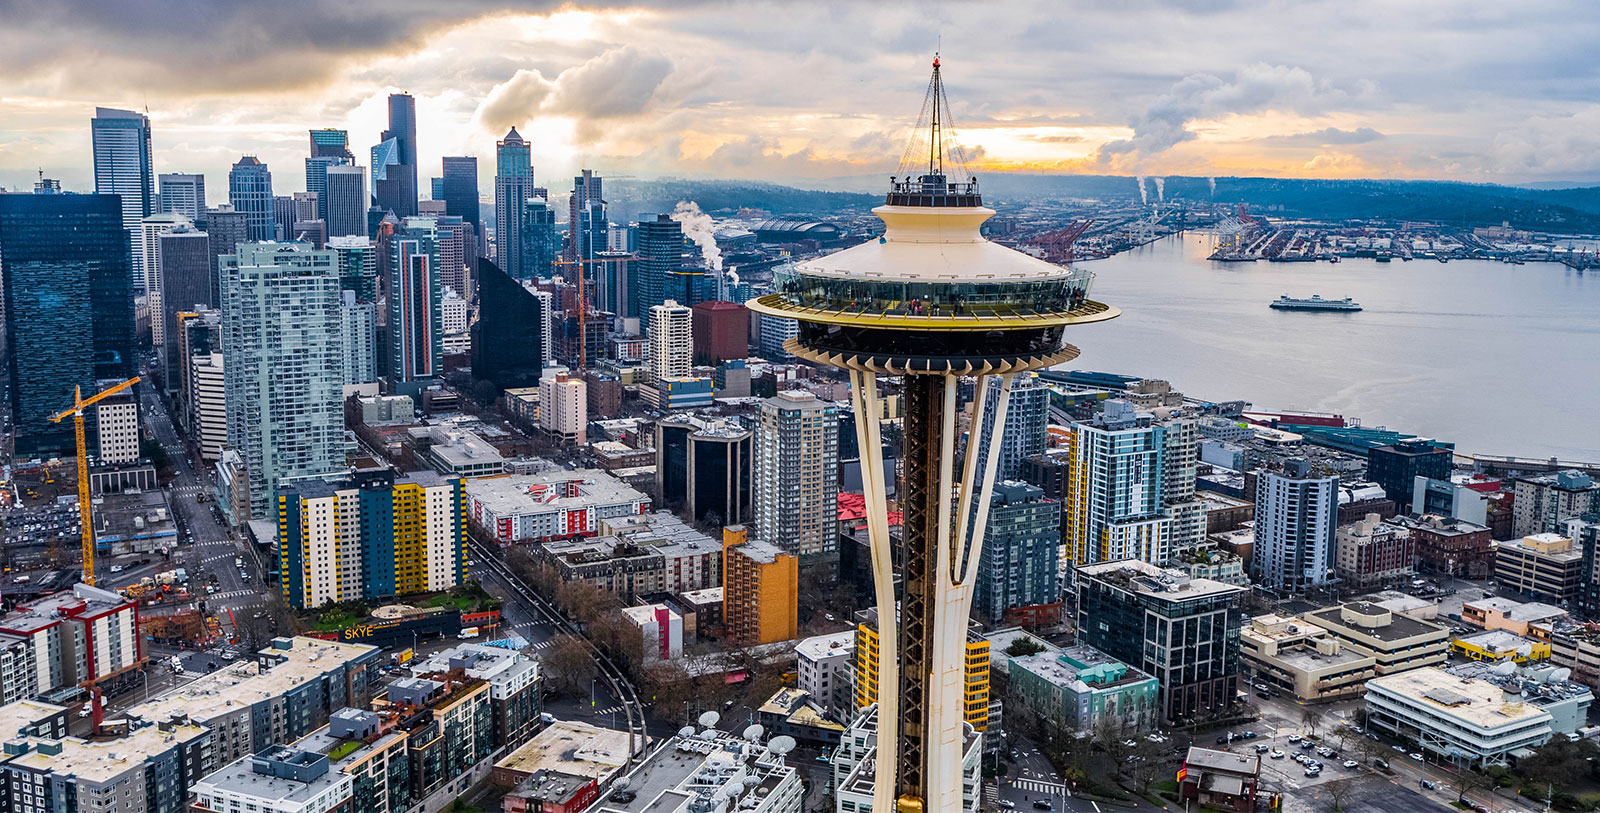 Discover the Olympic Sculpture Park, Seattle Art Museum, Paramount Theatre, and the Space Needle several blocks away.